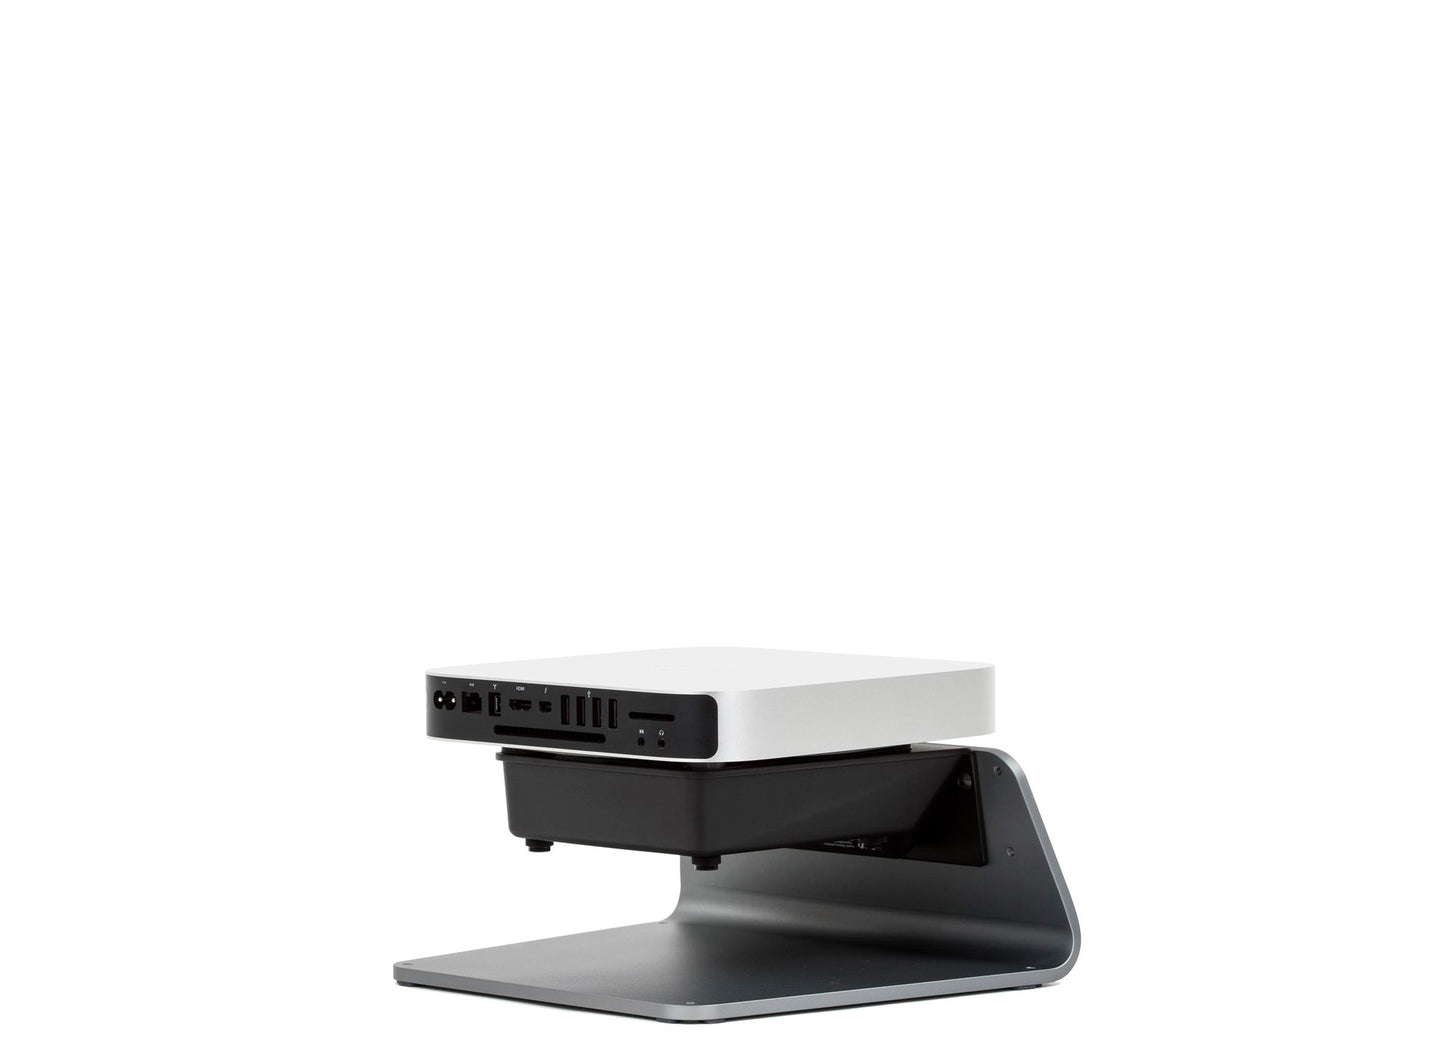 SVALT Cooling Stand model SxB14M gray back side view for quiet fan cooling performance with Apple Mac Mini